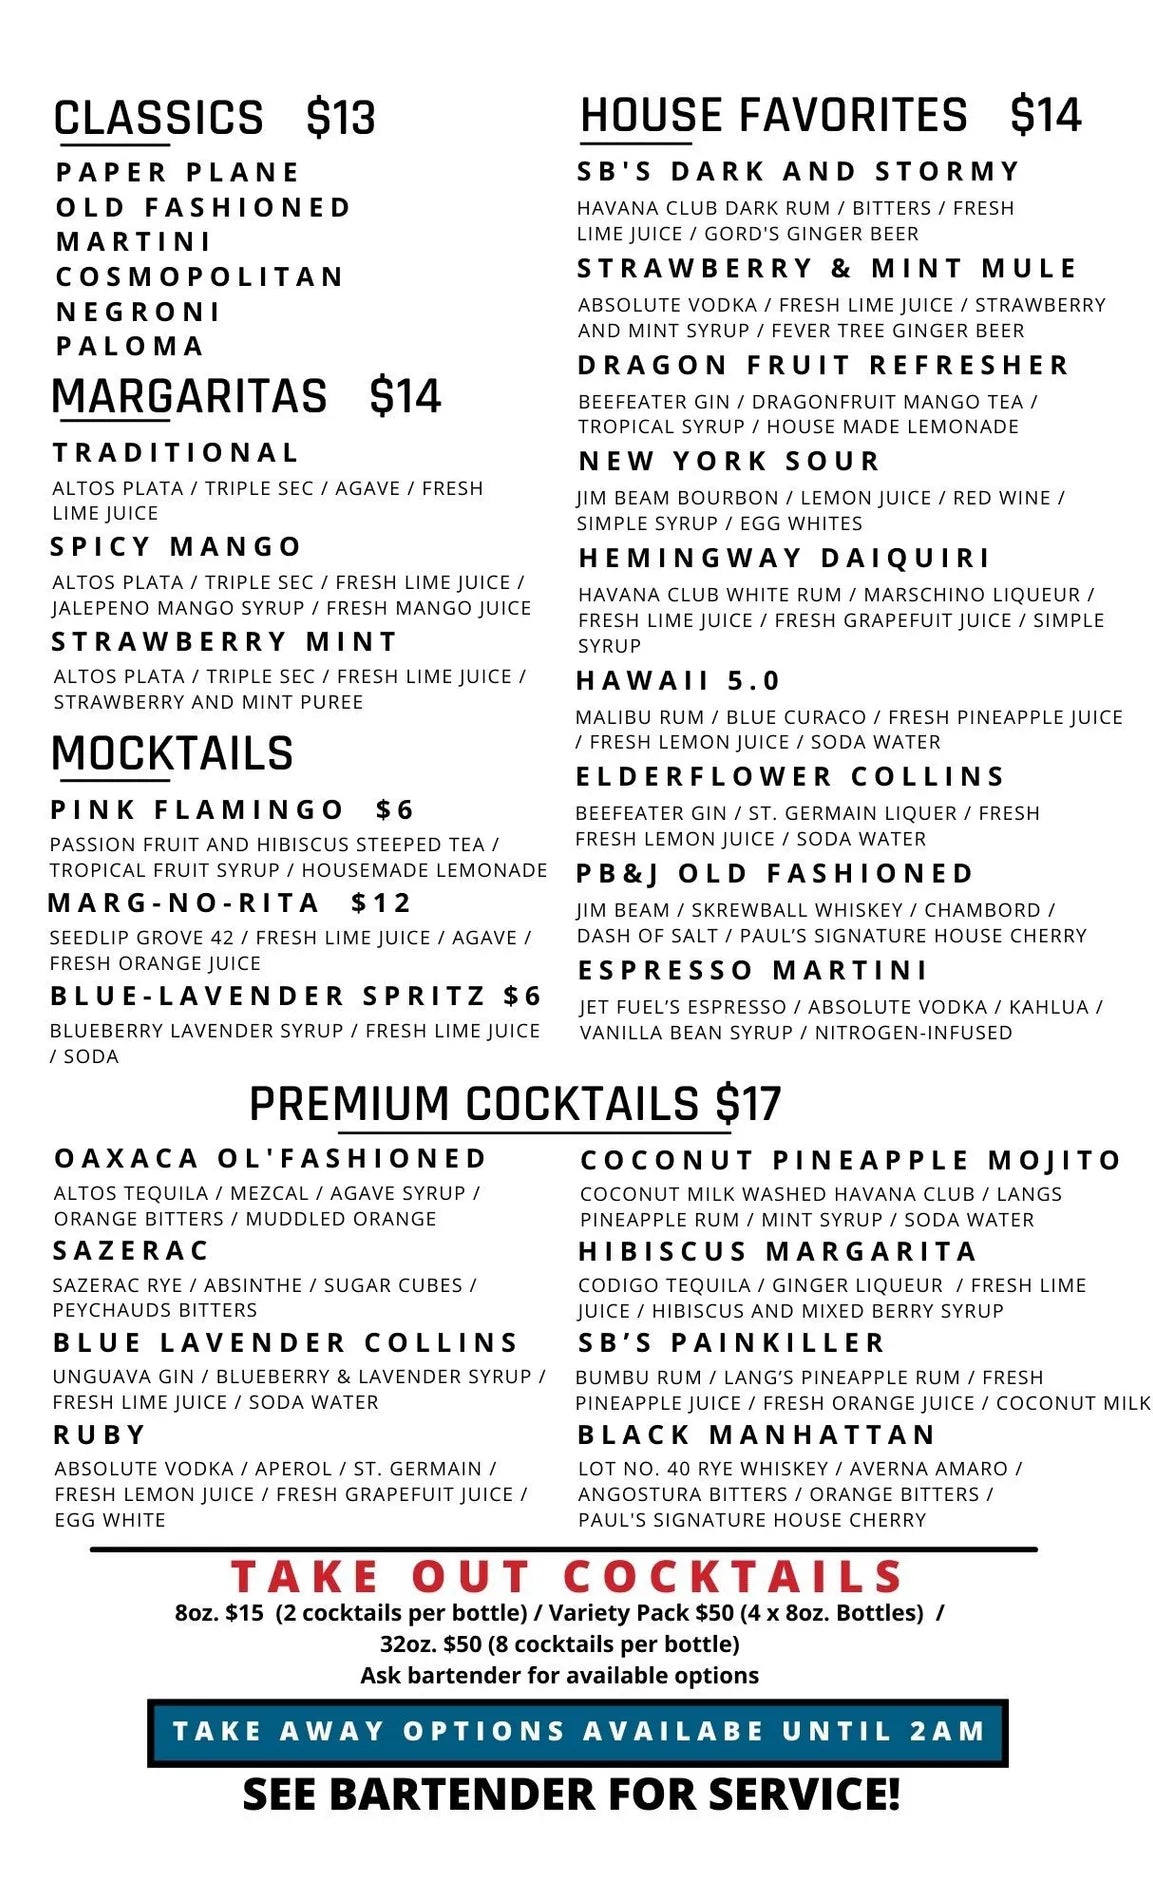 Super Bargains Cocktail Menu on a white background with black text. Menu shows options like "Classics, House Favorites, Margaritas, Mocktails, Premium Cocktails" - Showing even Take Out Cocktails are avalible. 